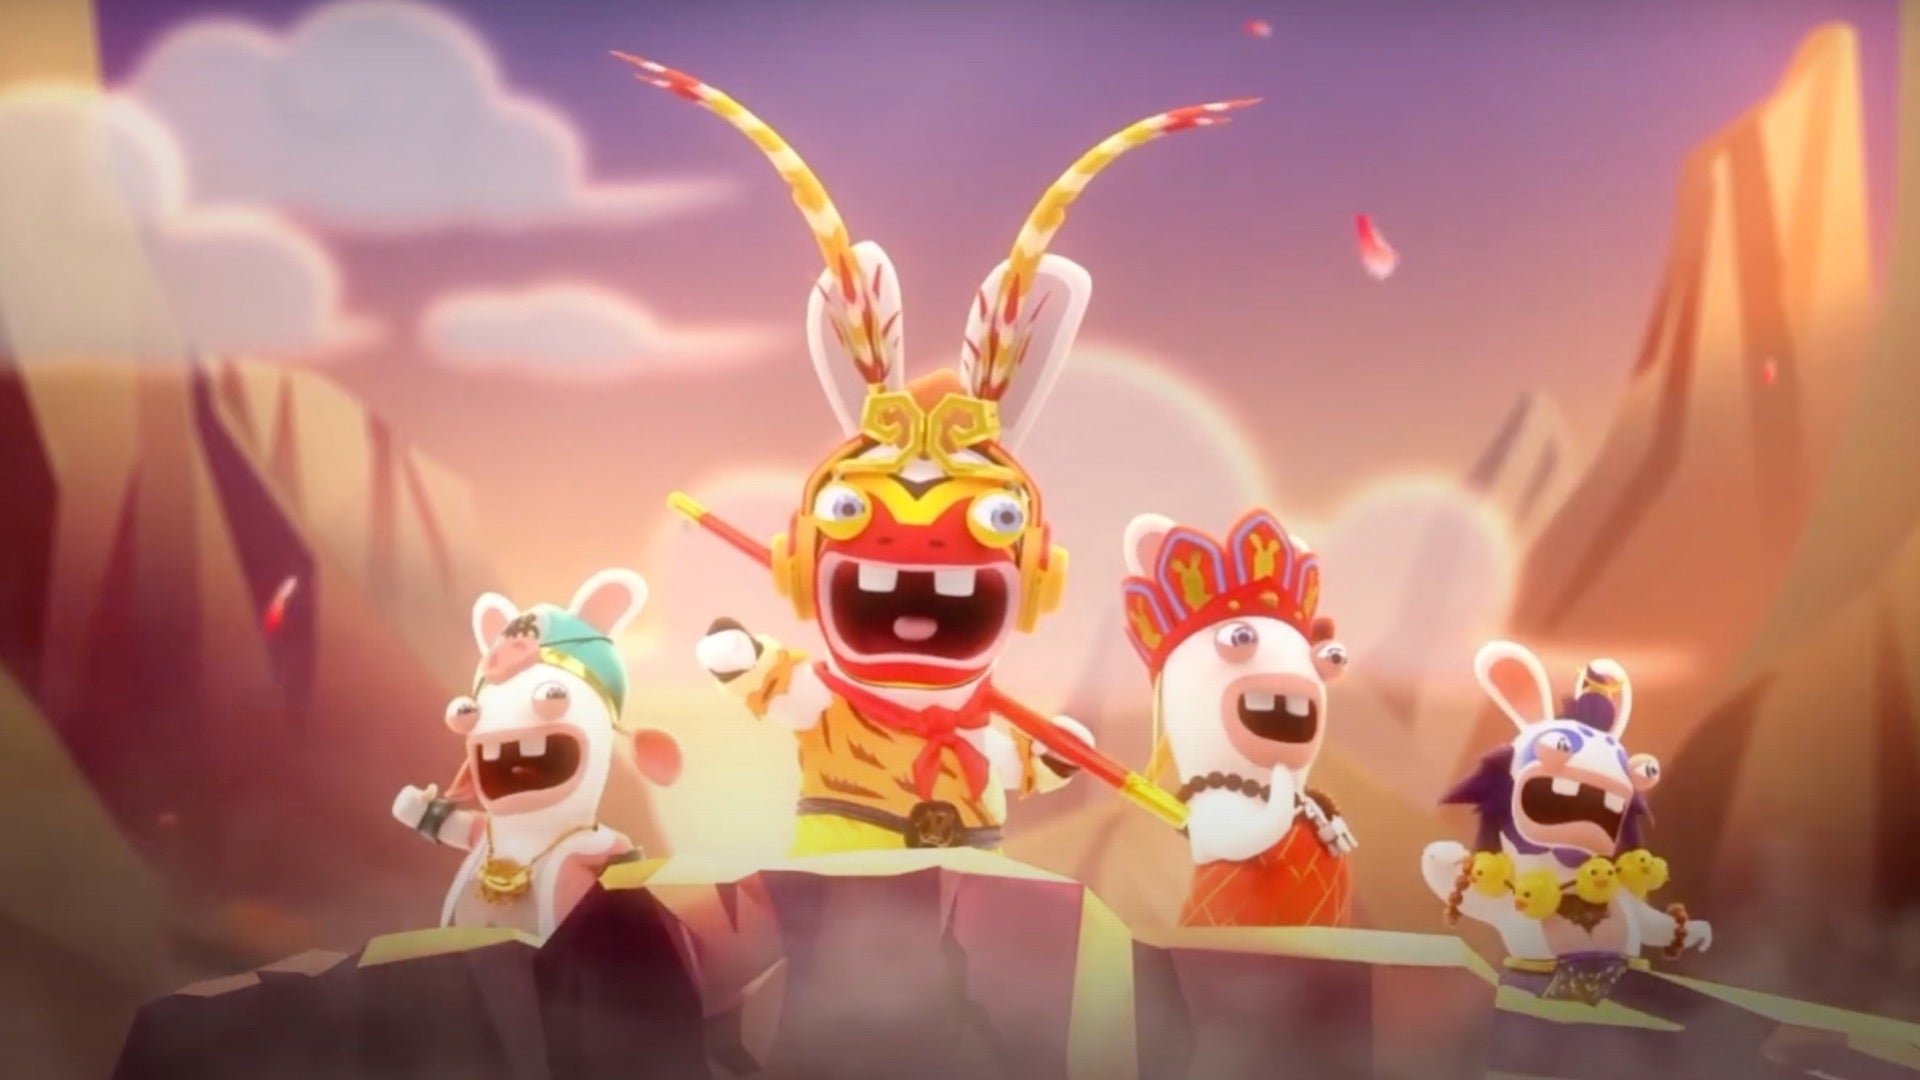 Image for Ubisoft's China-exclusive Rabbids game Adventure Party getting global release